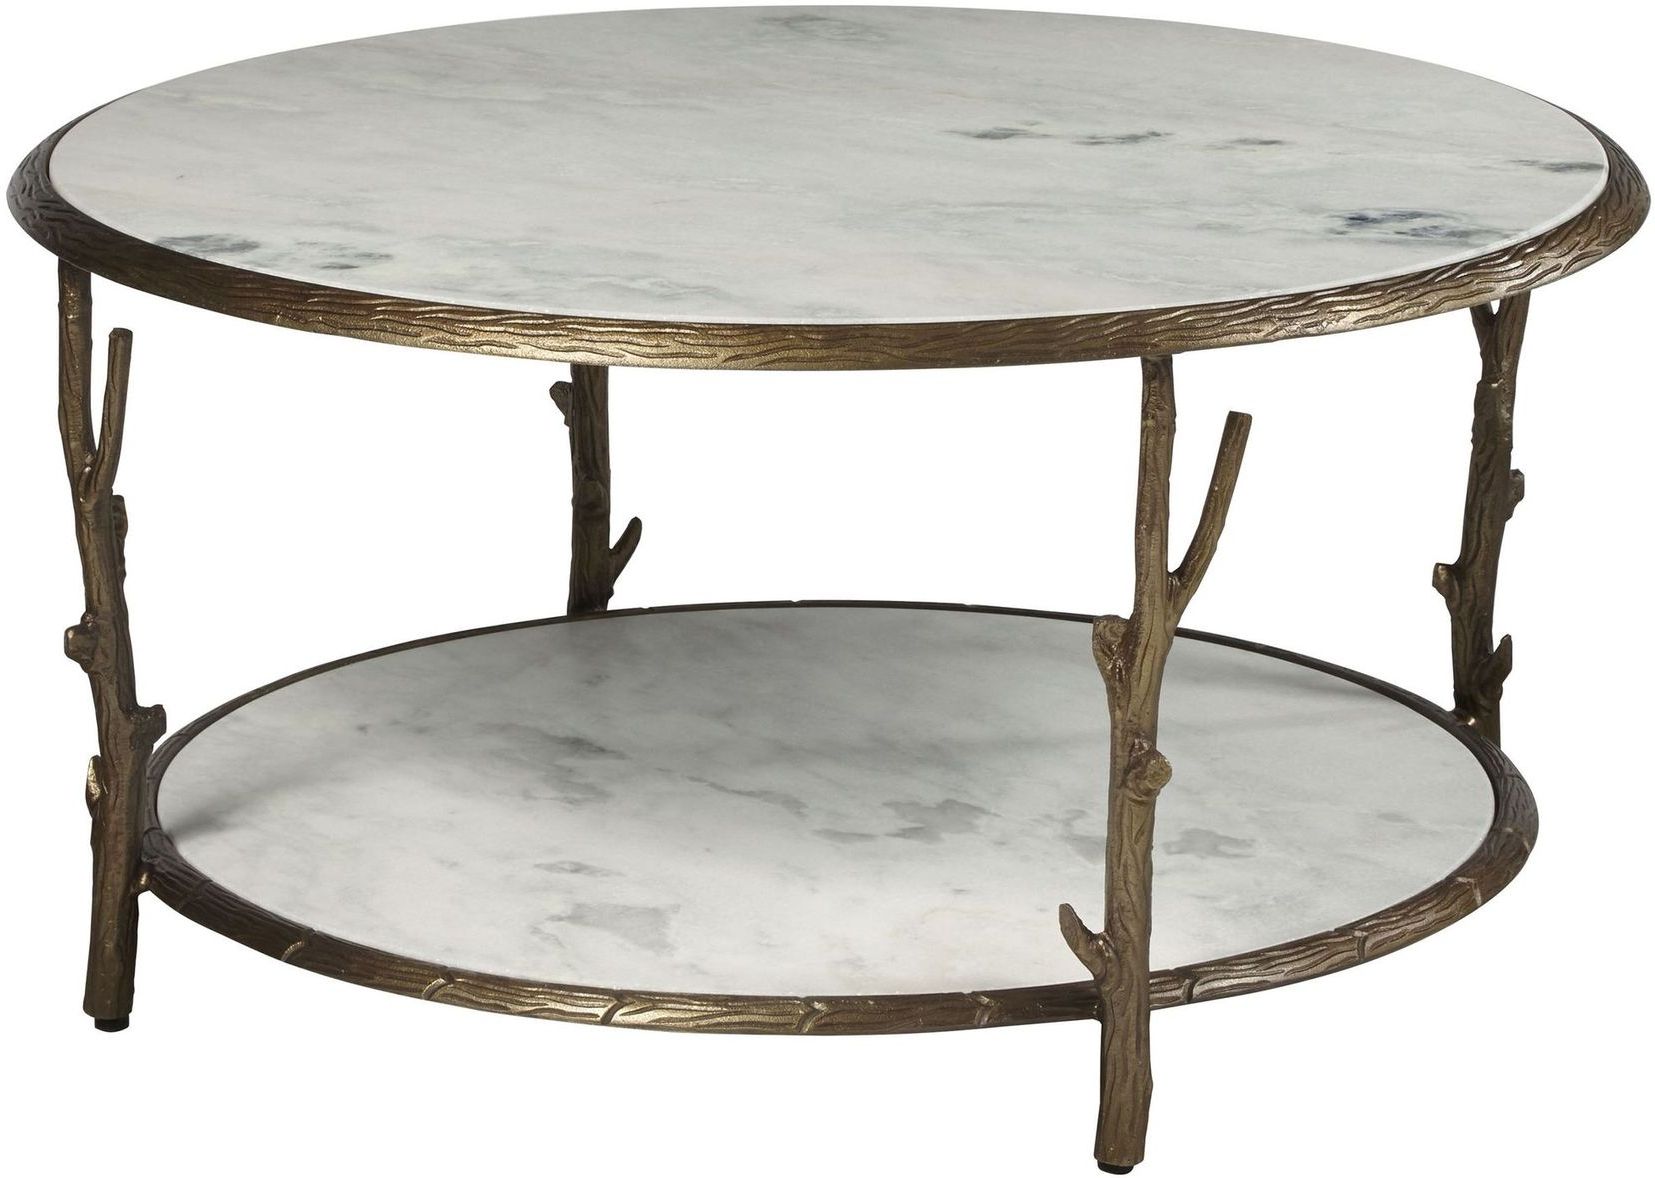 Preferred Antique Cocktail Tables With Regard To Antique Accents Marble Brady Cocktail Table 2 Piece Set (View 10 of 20)